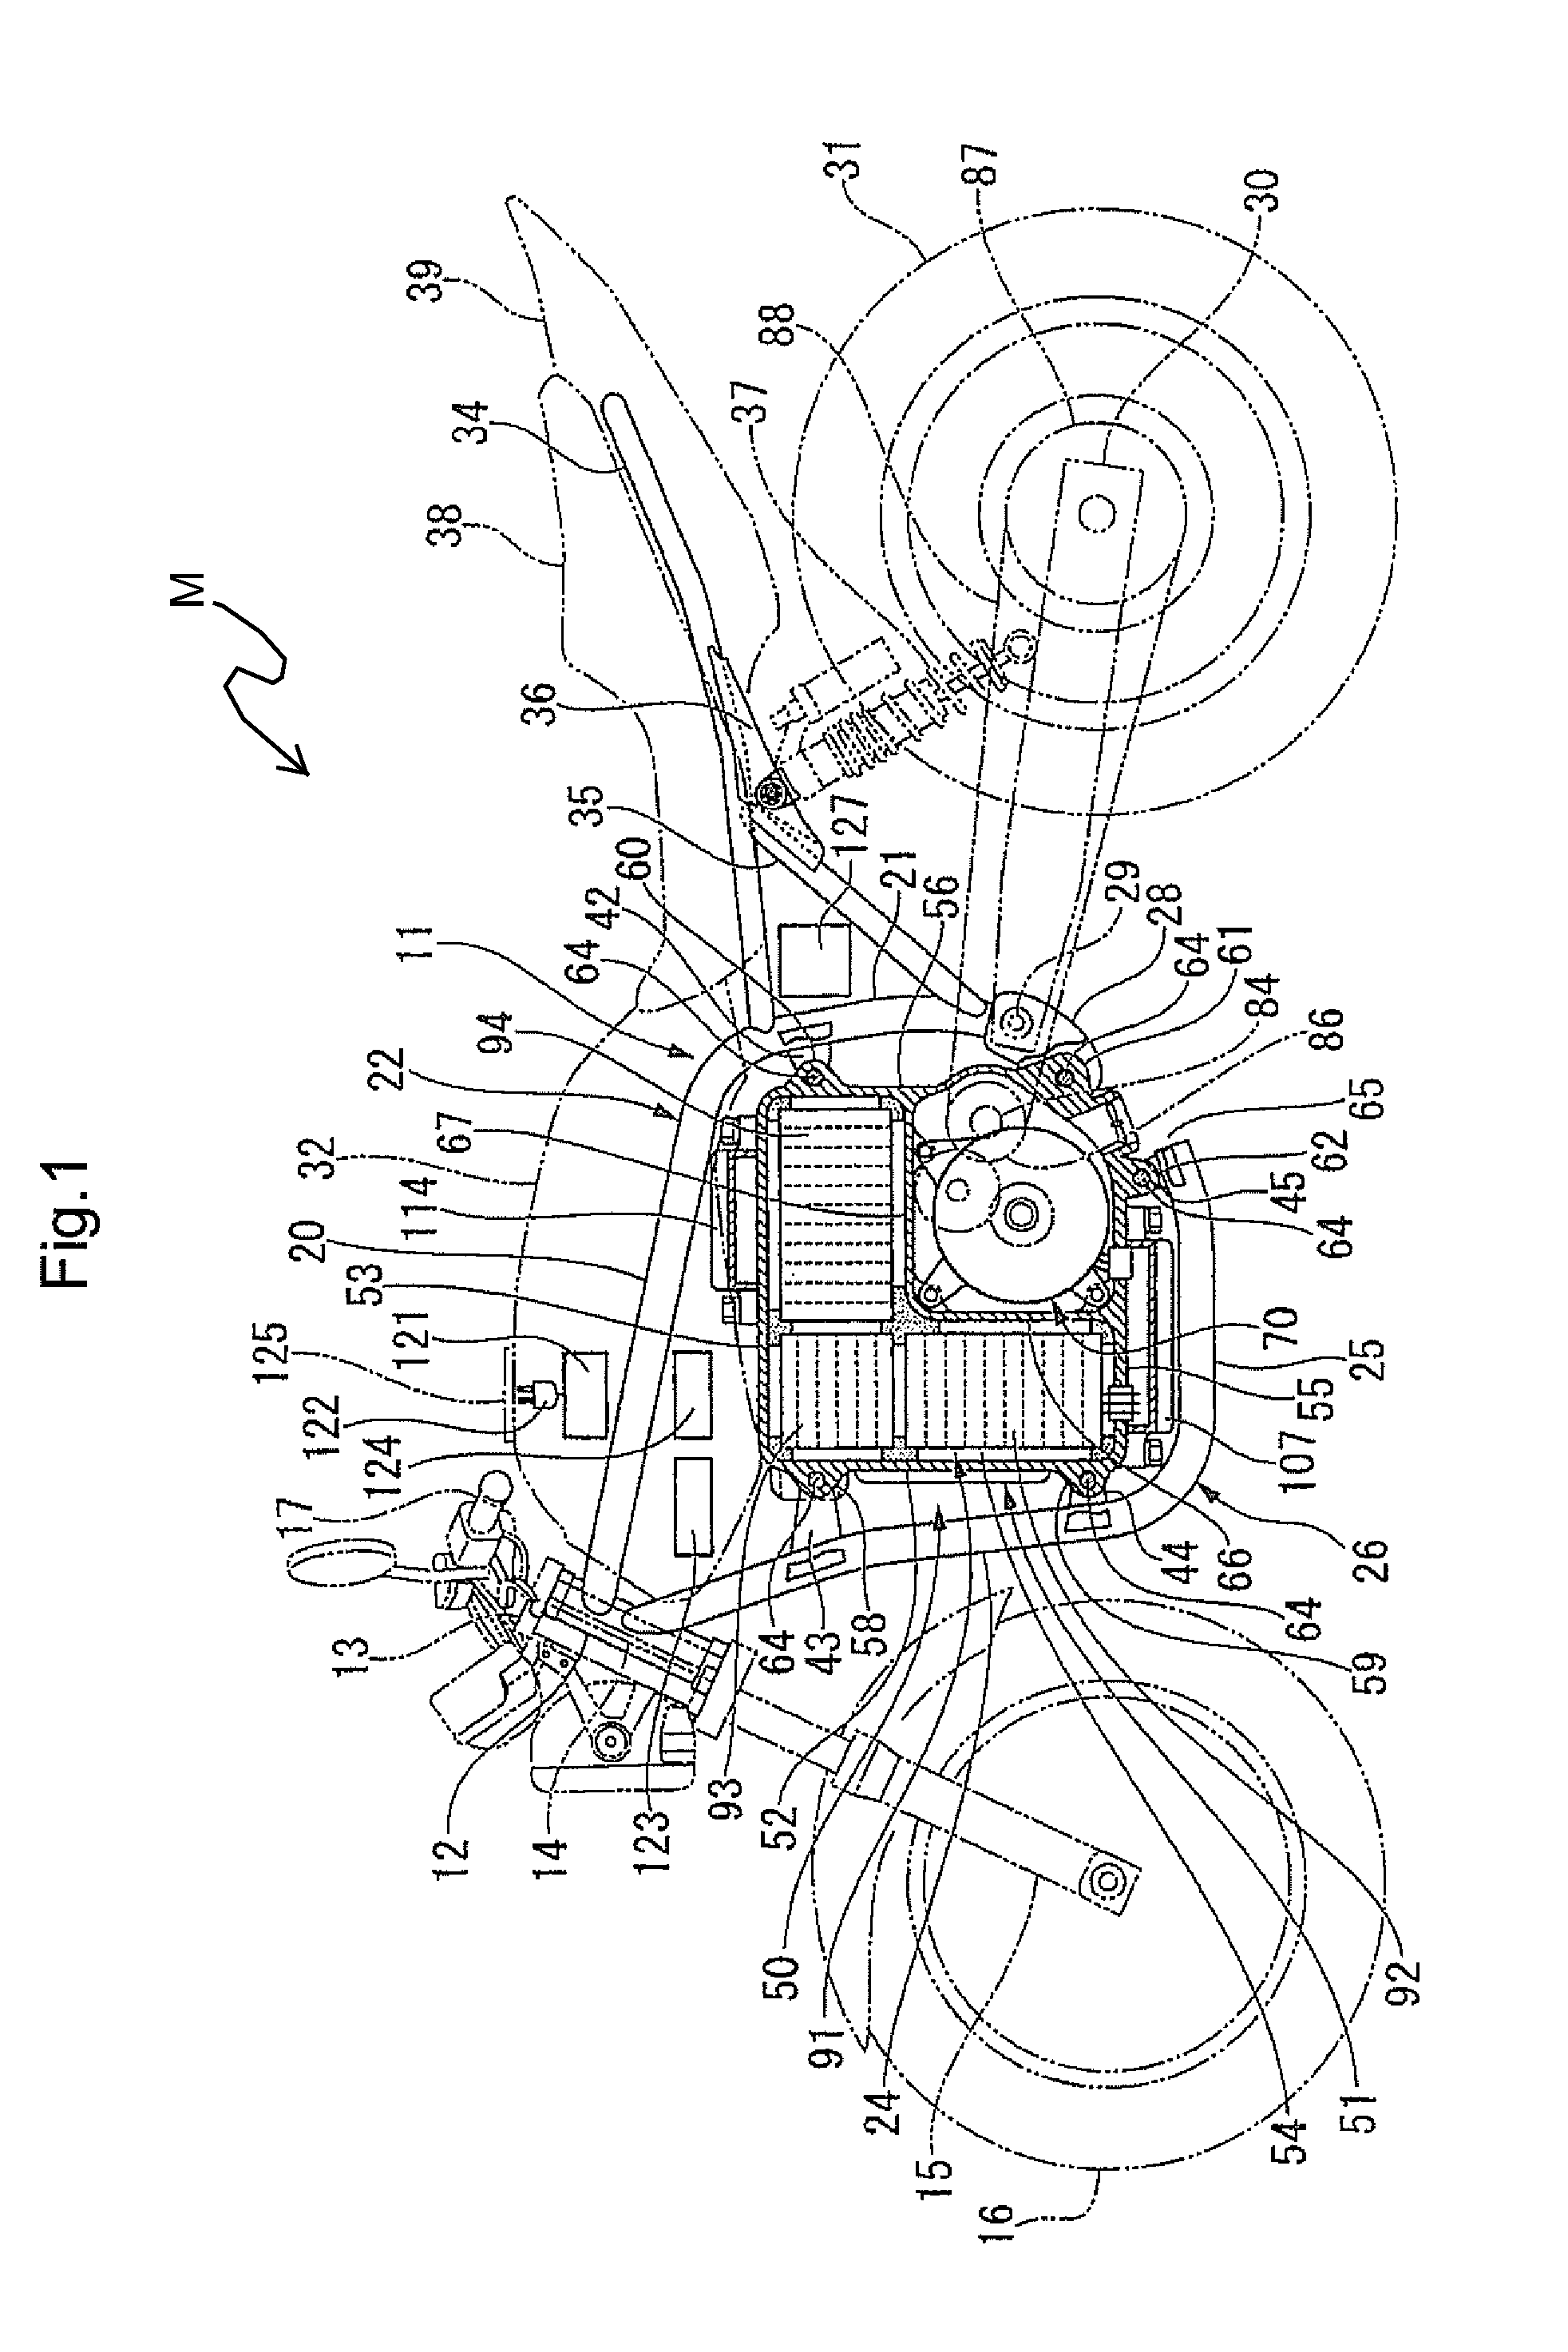 Drive assembly for an electric motorcycle, and electric motorcycle incorporating same